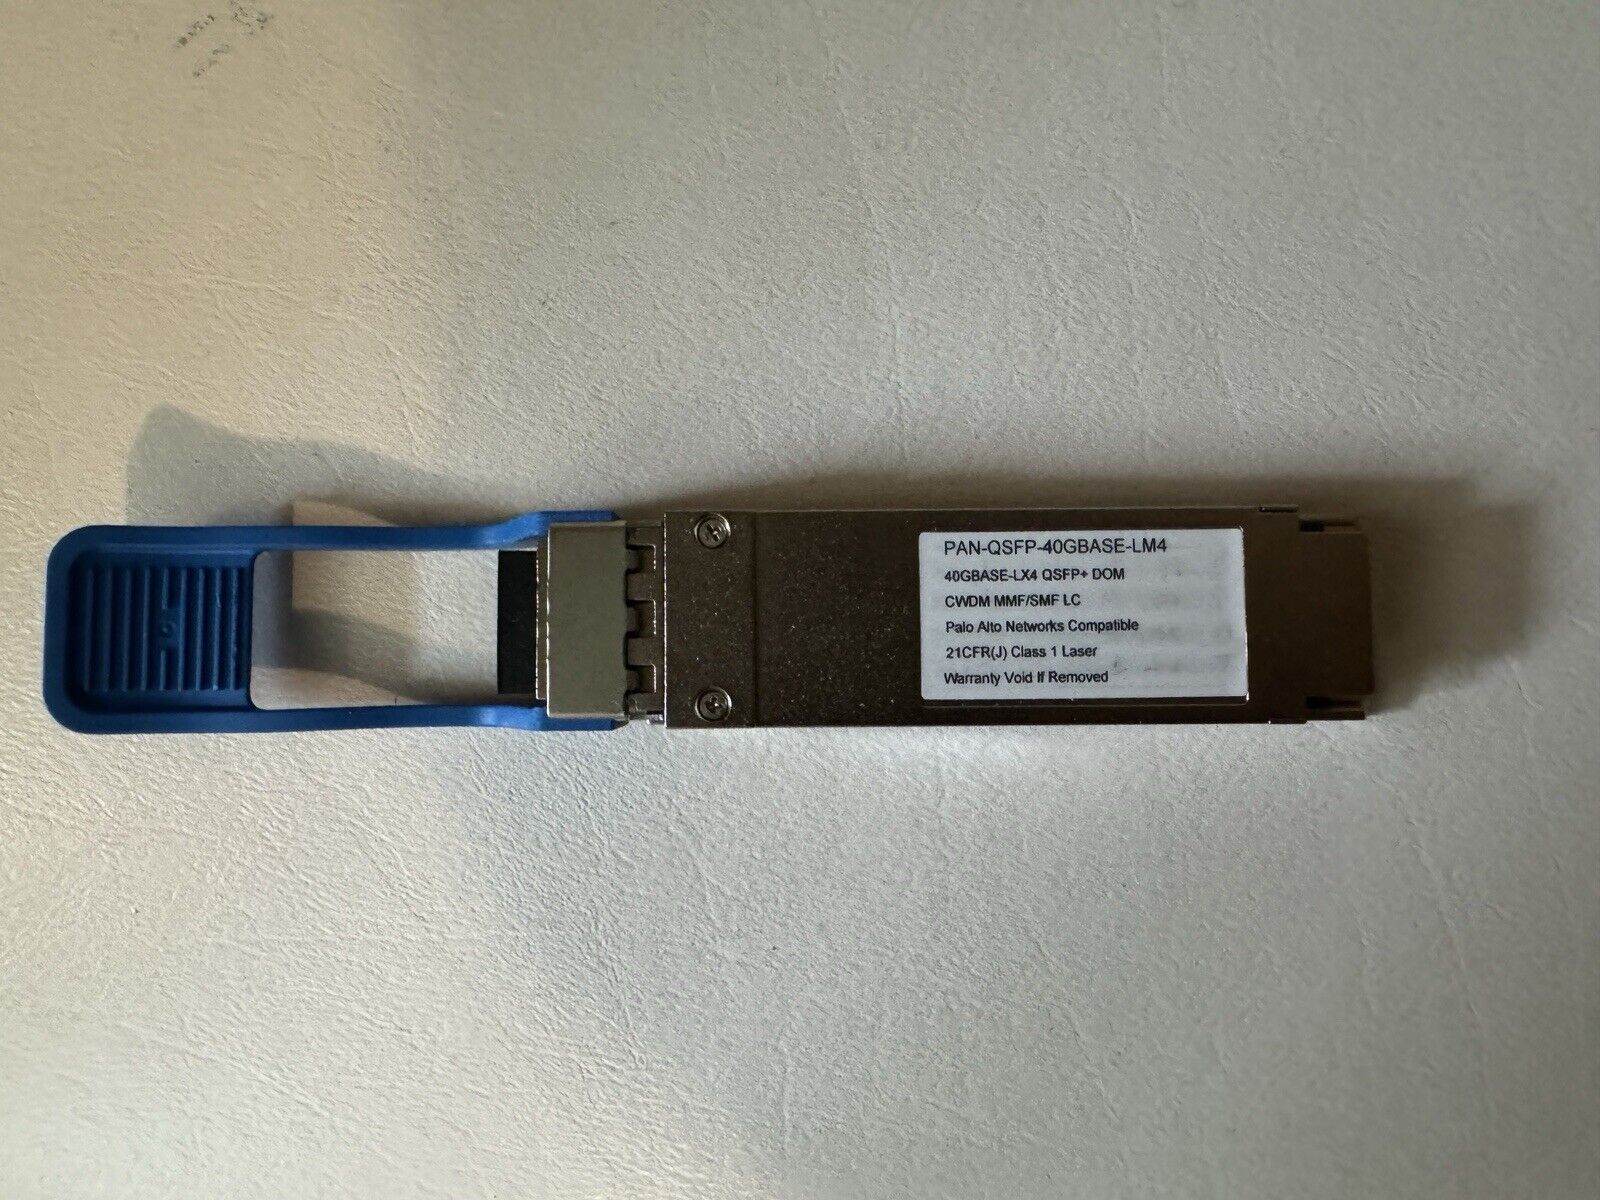 Palo Alto PAN-QSFP-40GBASE-LM4 40GBASE-LM4 1km LC SMF QSFP+ 40GE LM4 Transceiver